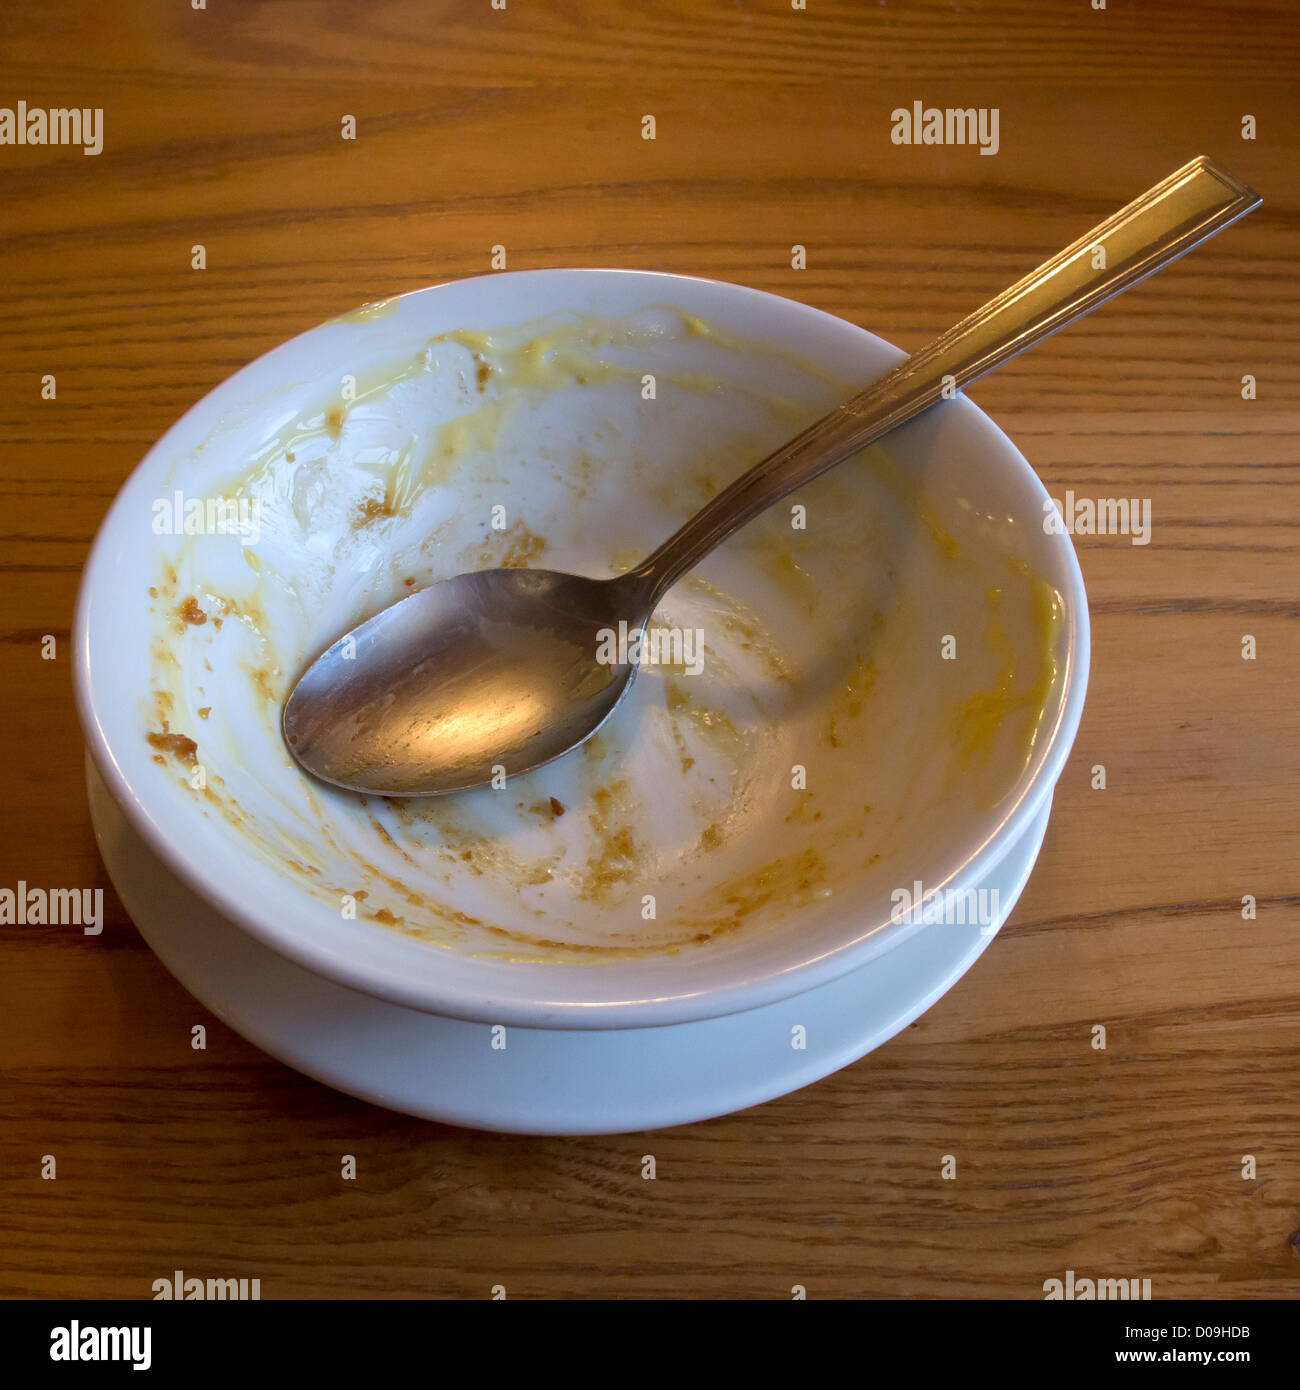 Empty used pudding bowl and spoon empty bowl of custard traditional british pudding treacle syrup pudding sponge and custard Stock Photo